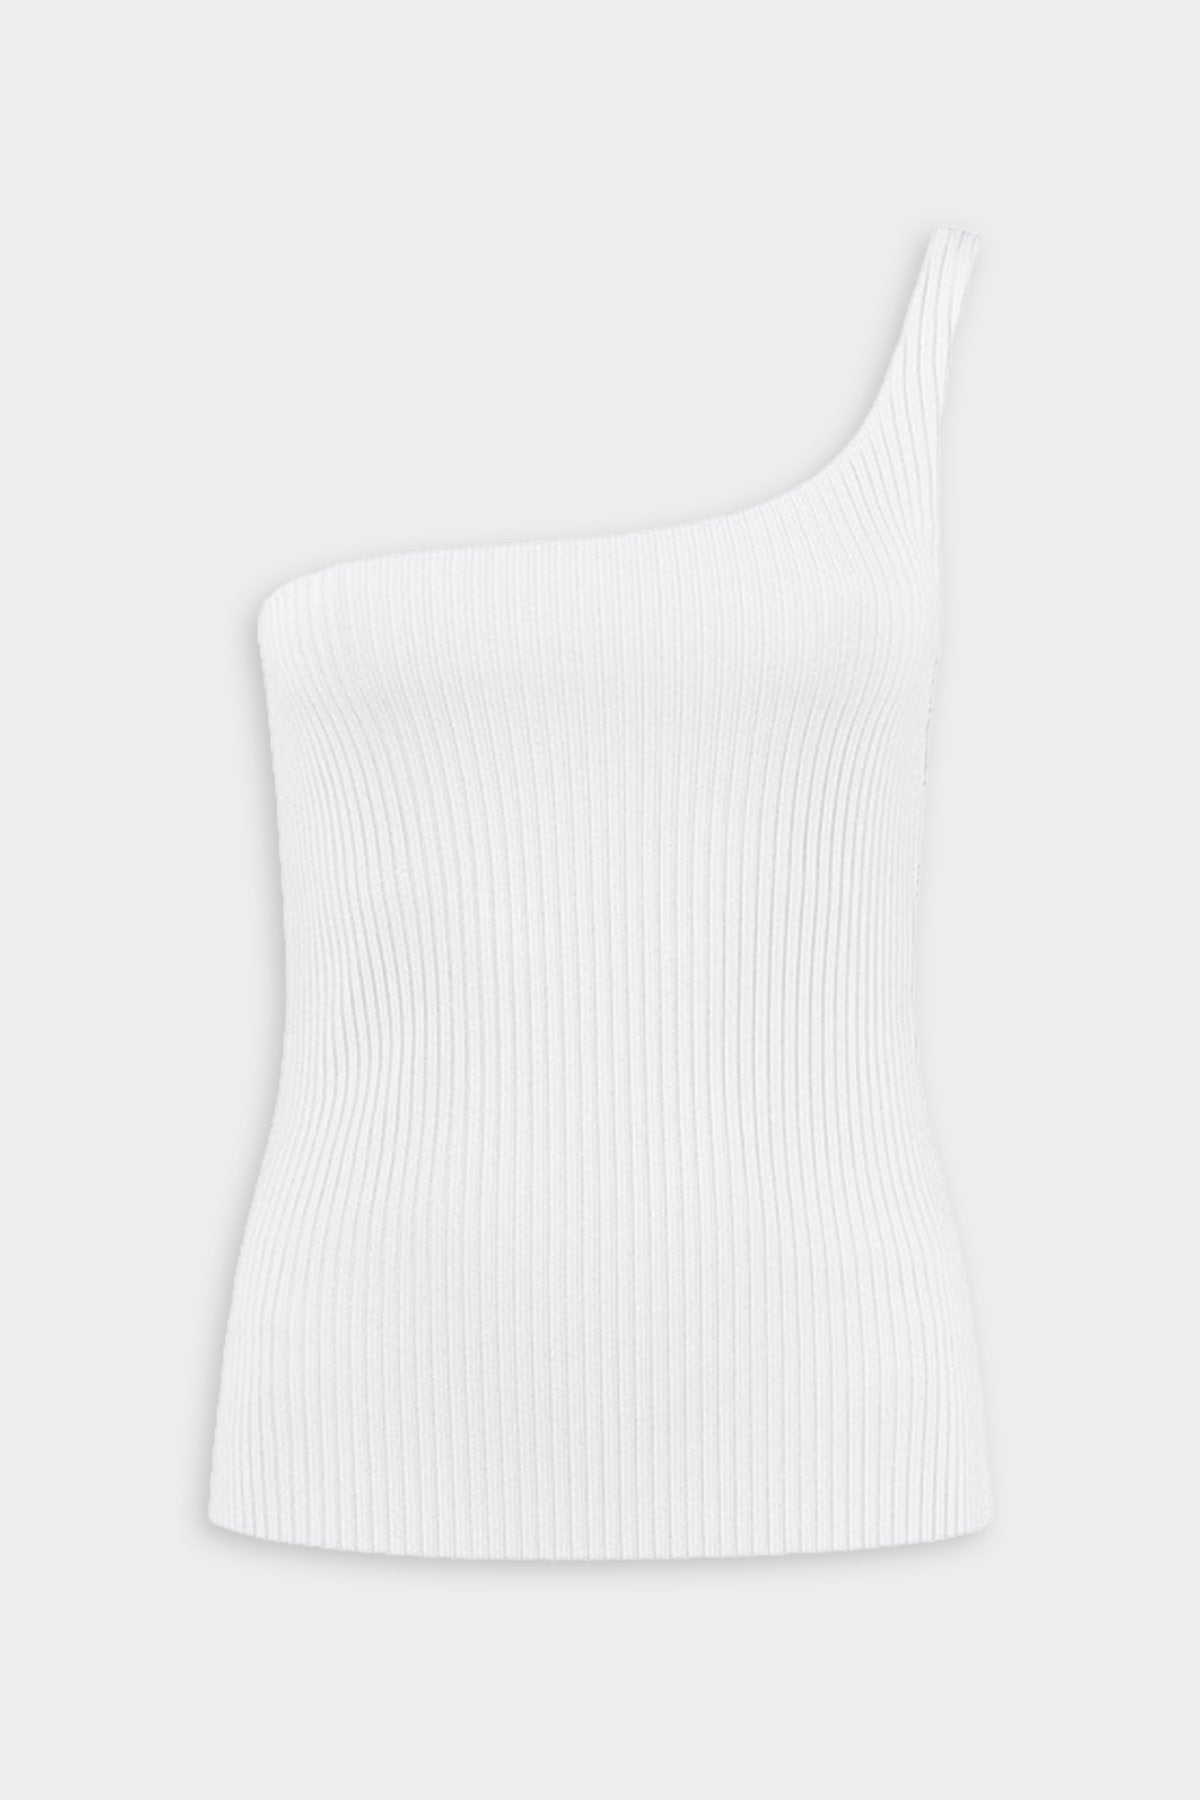 Chize One-Shoulder Knit Ribbed Top in White - shop-olivia.com